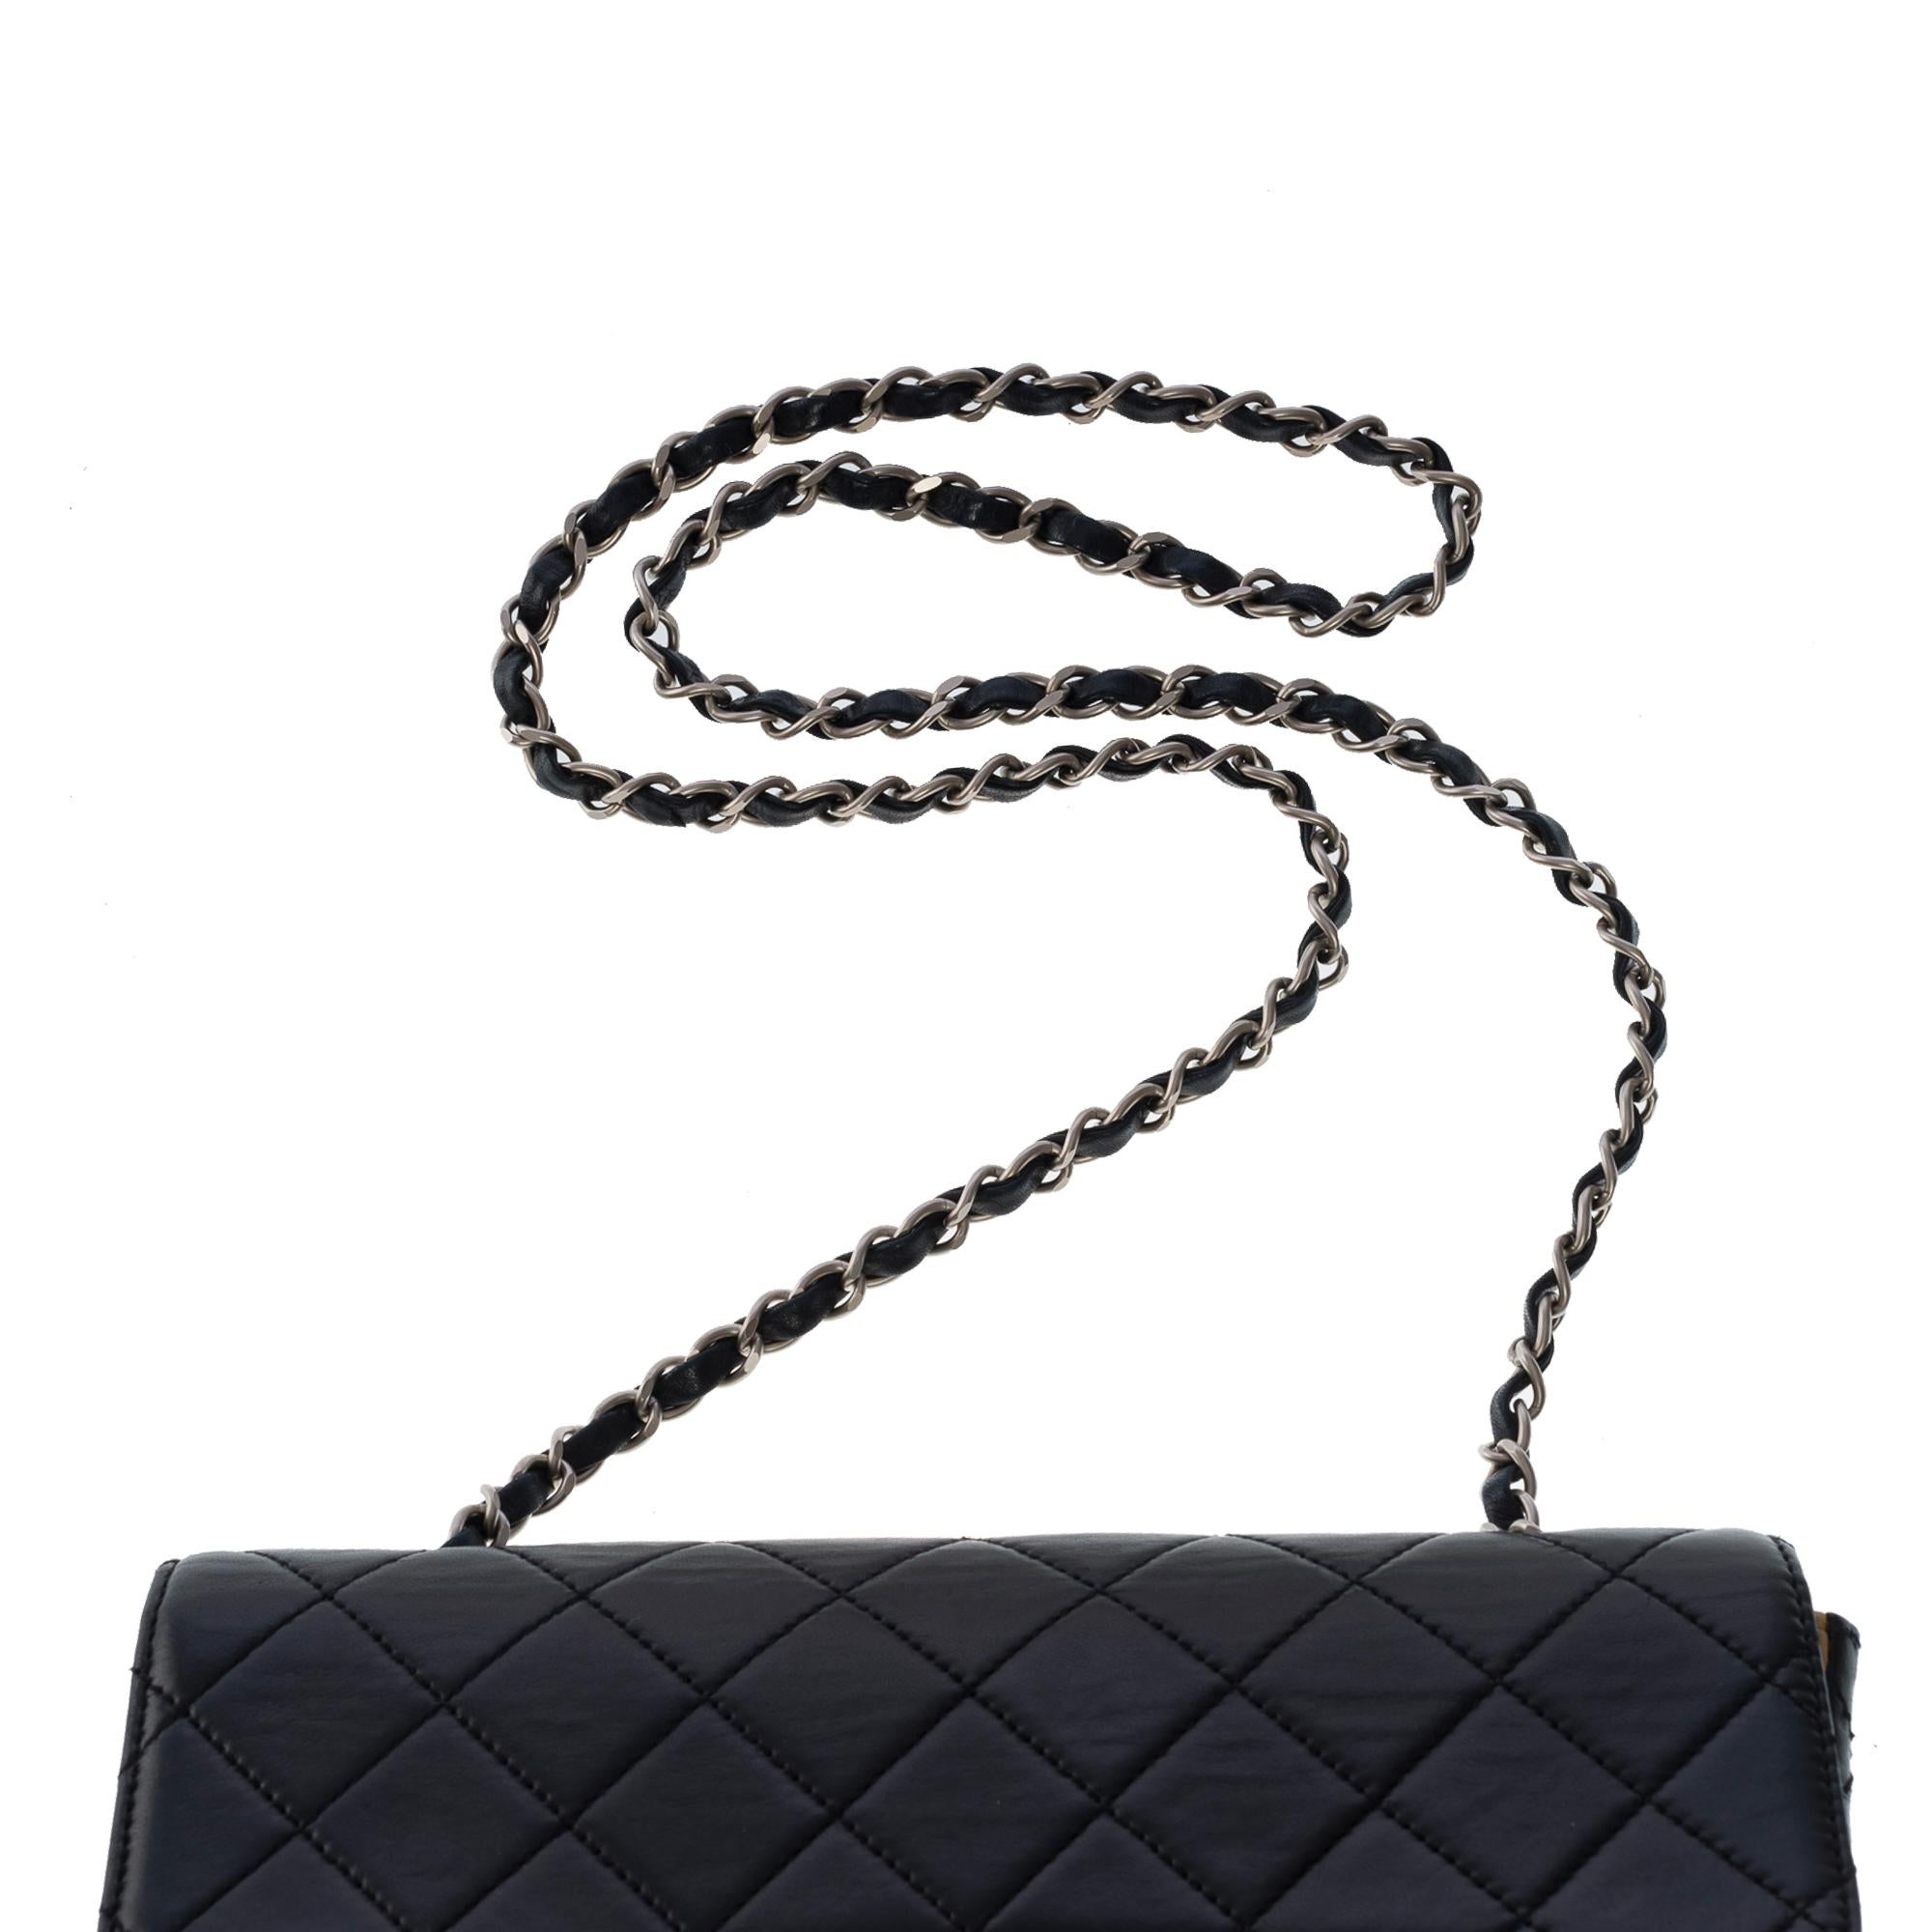 Rare Chanel Classic single flap shoulder bag in black/beige quilted lambskin, SHW For Sale 2